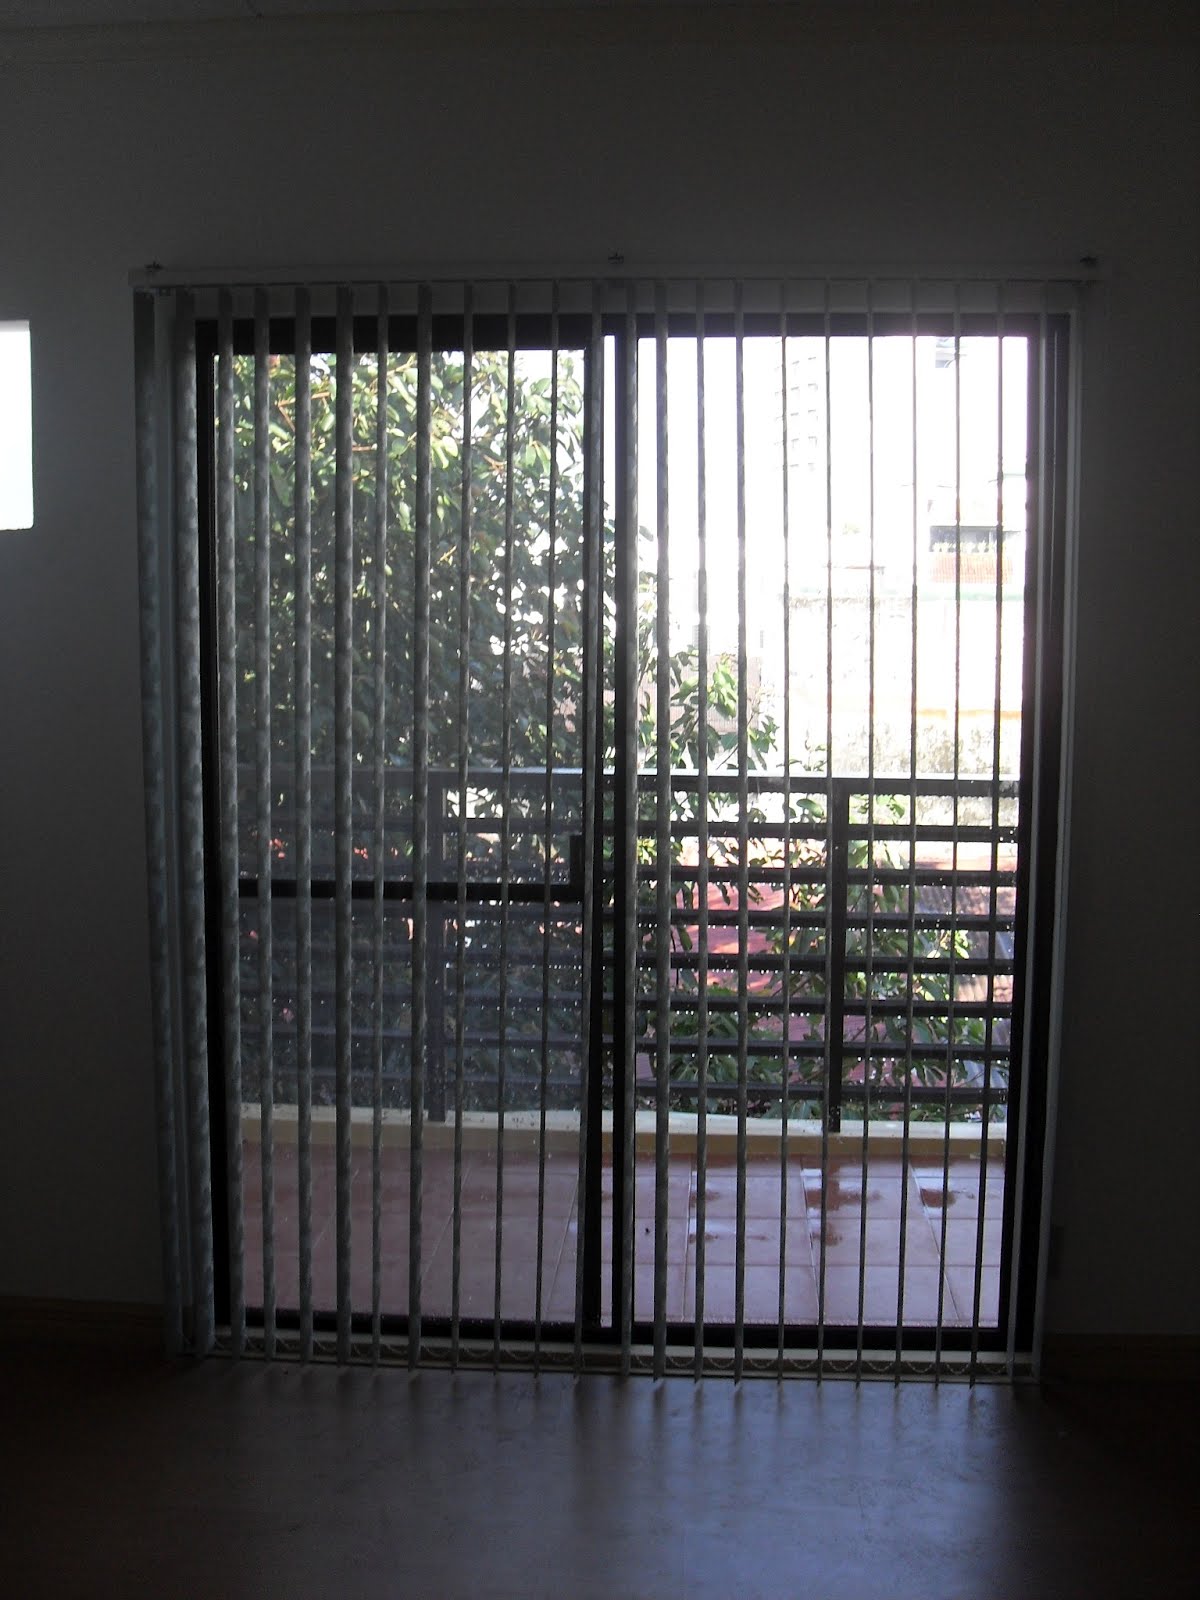 PVC Vertical Blinds Installed at Antipolo City, Philippines